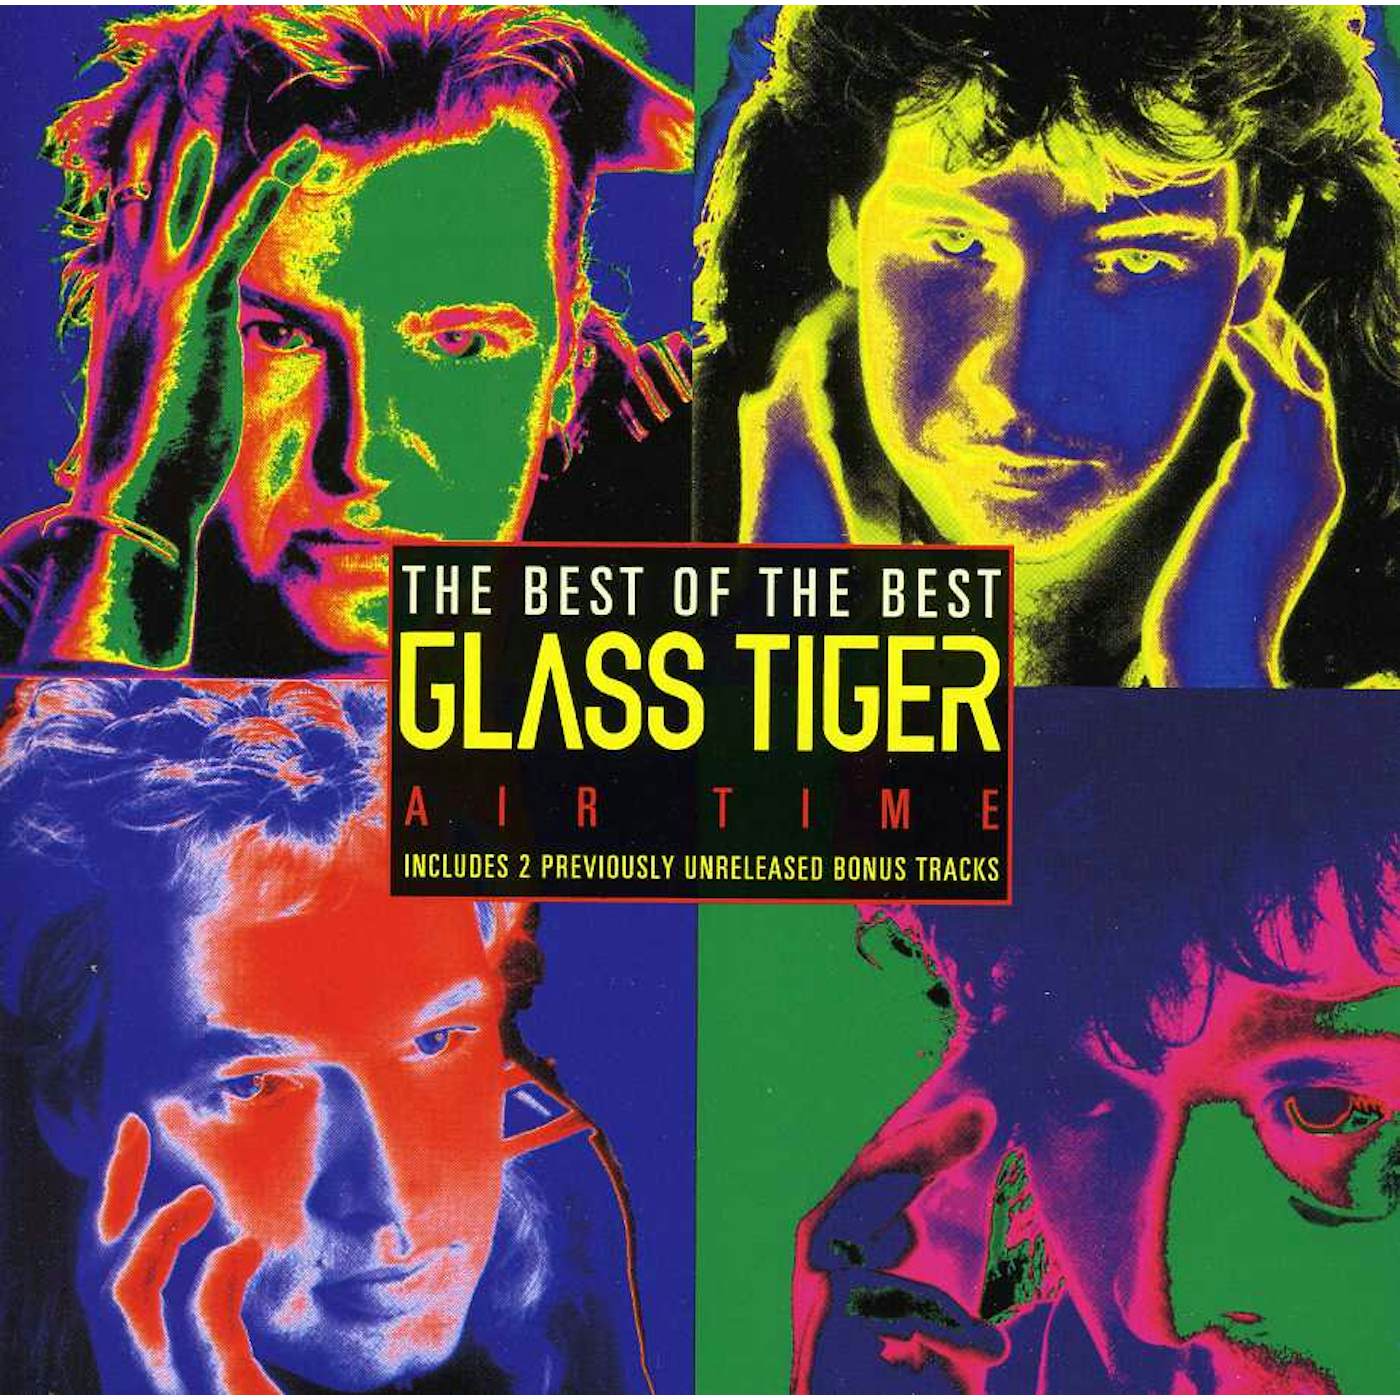 BEST OF GLASS TIGER CD